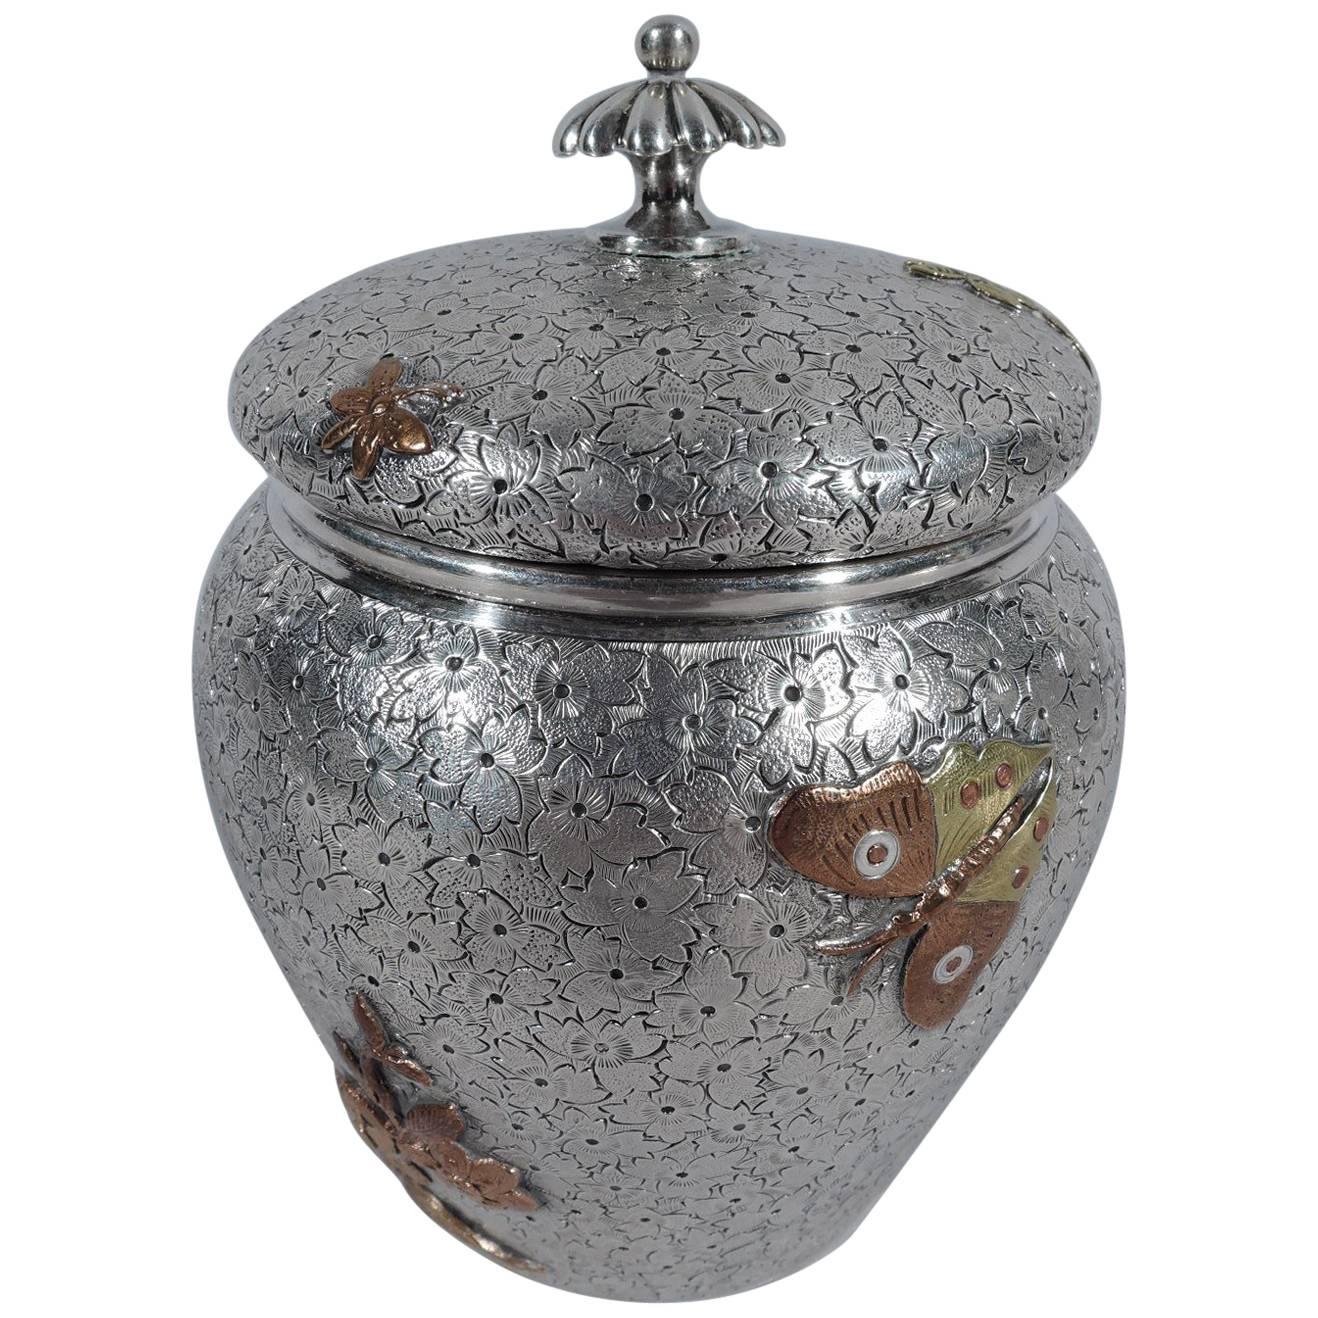 Unusual Dominick & Haff Sterling Silver and Mixed Metal Tea Caddy